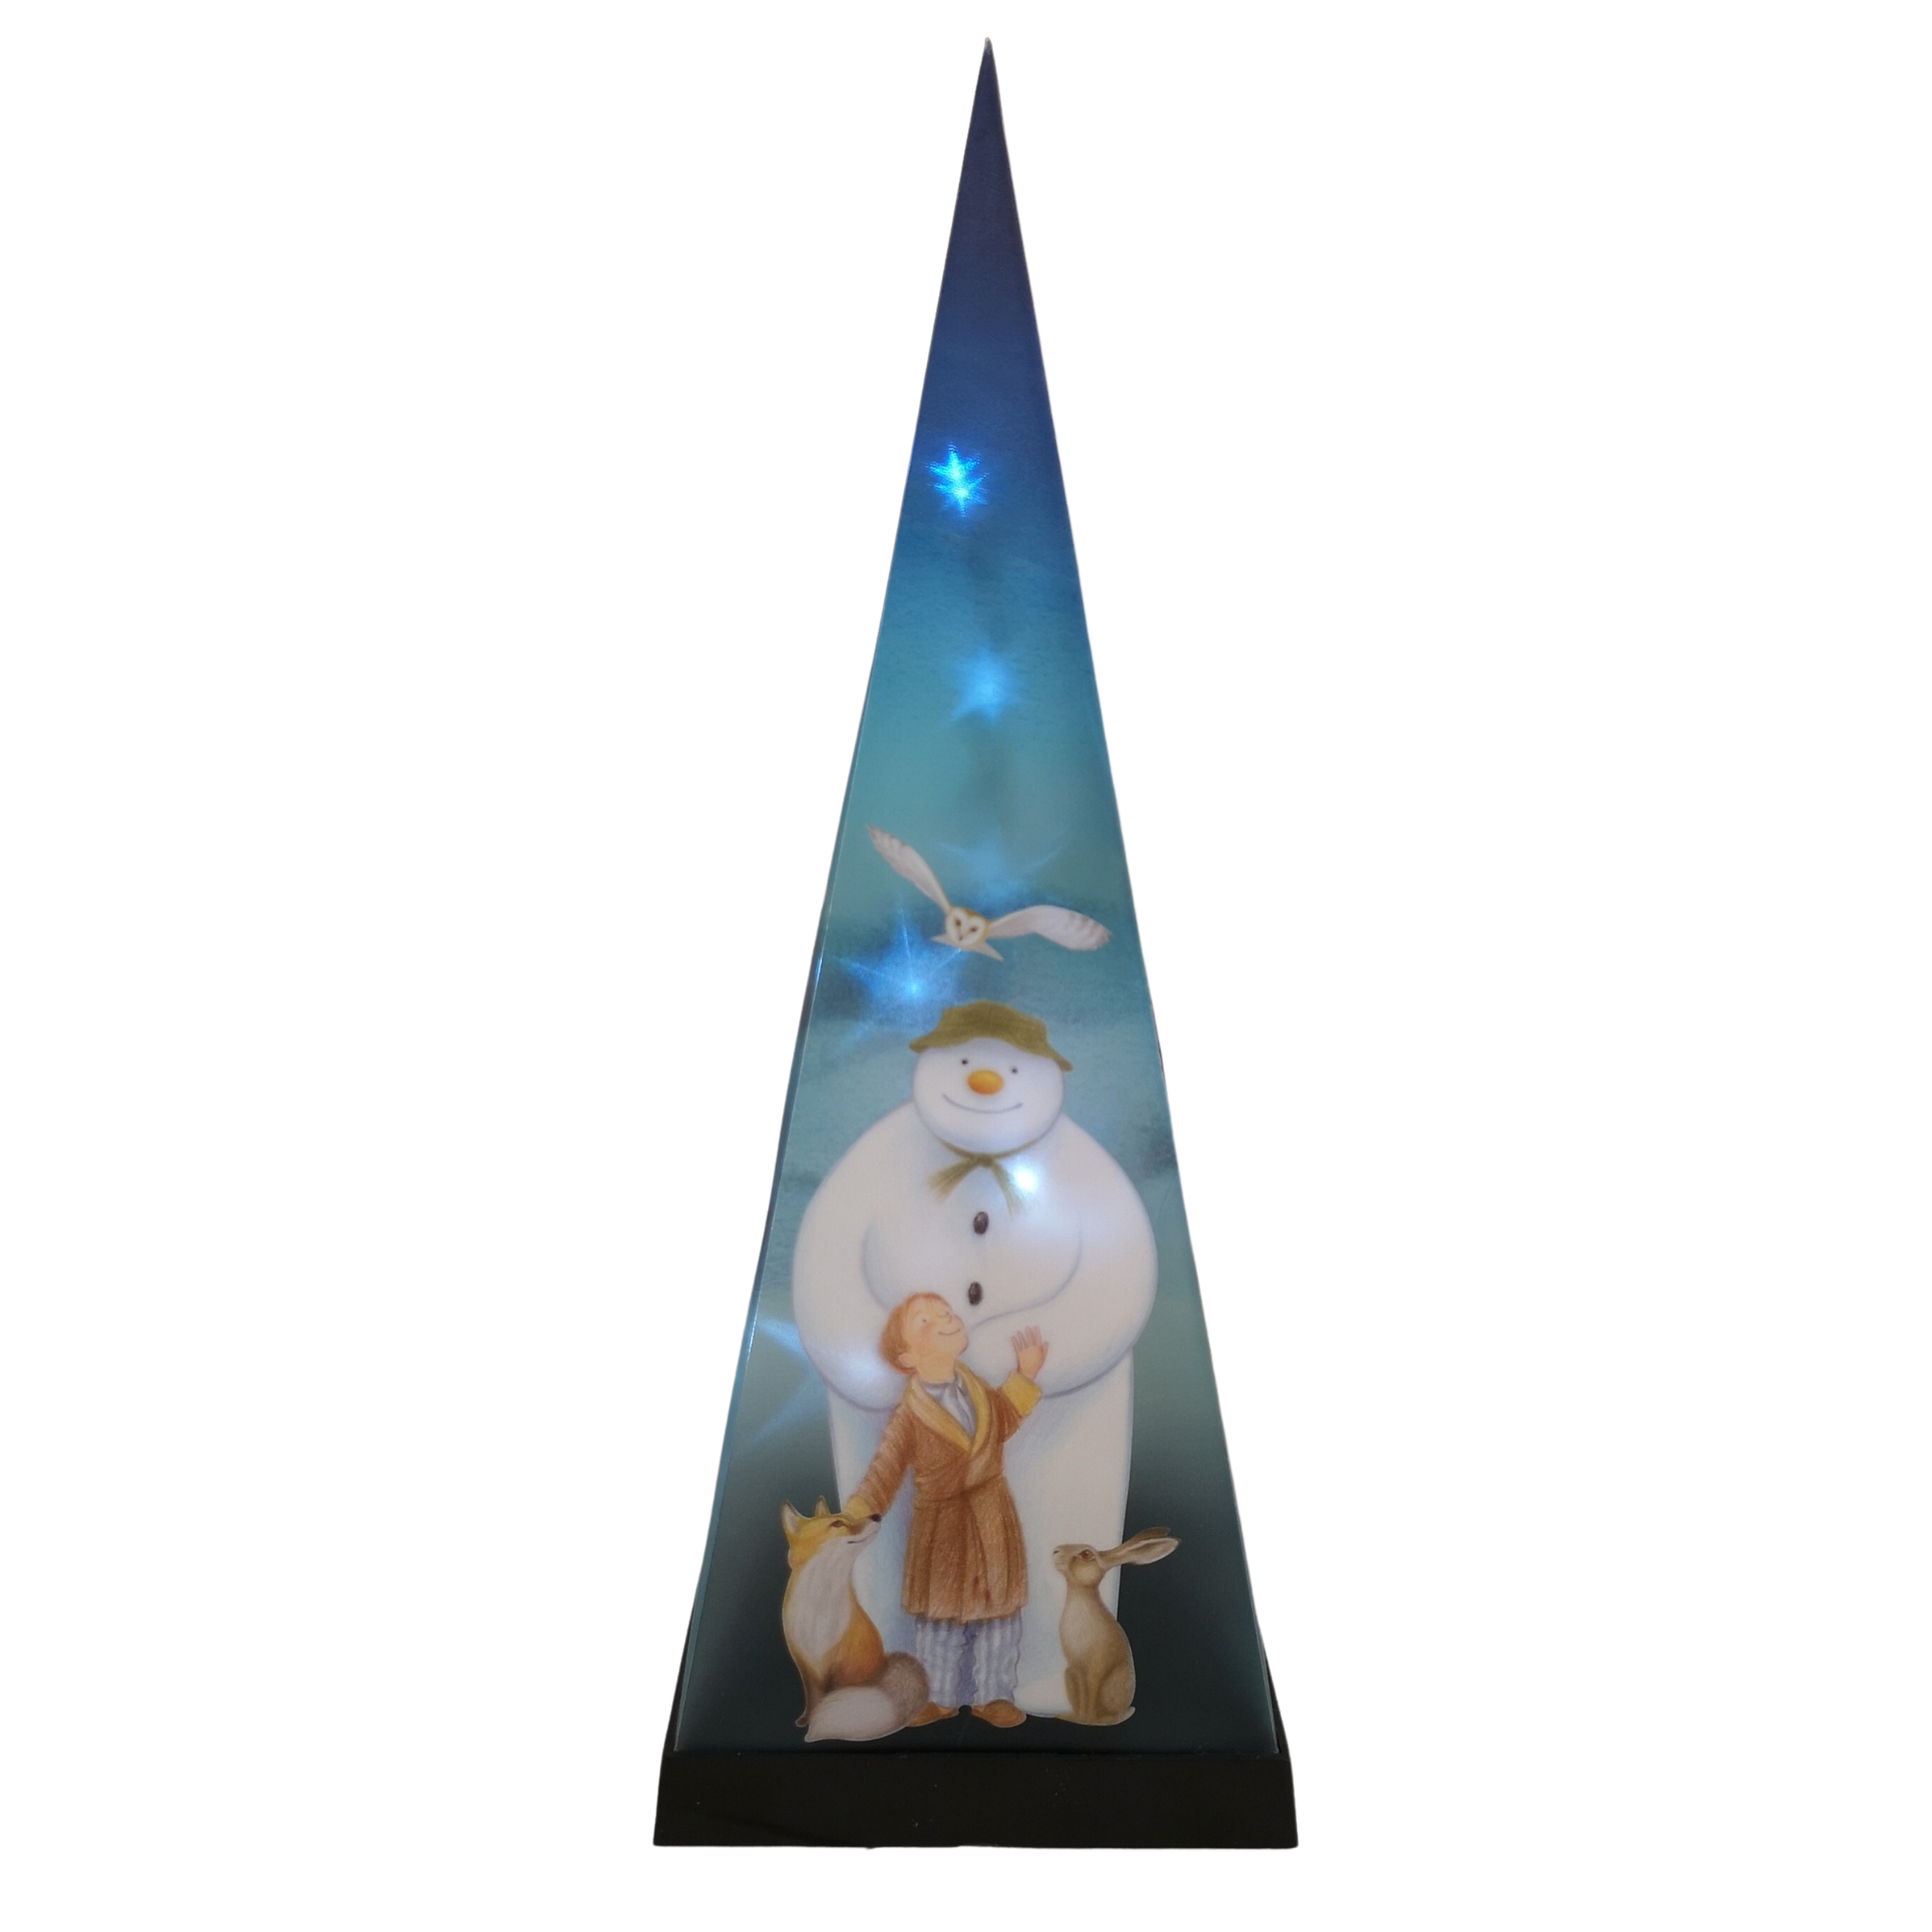 35cm Battery Operated Laser Pyramid Christmas Decoration - The Snowman and Friends